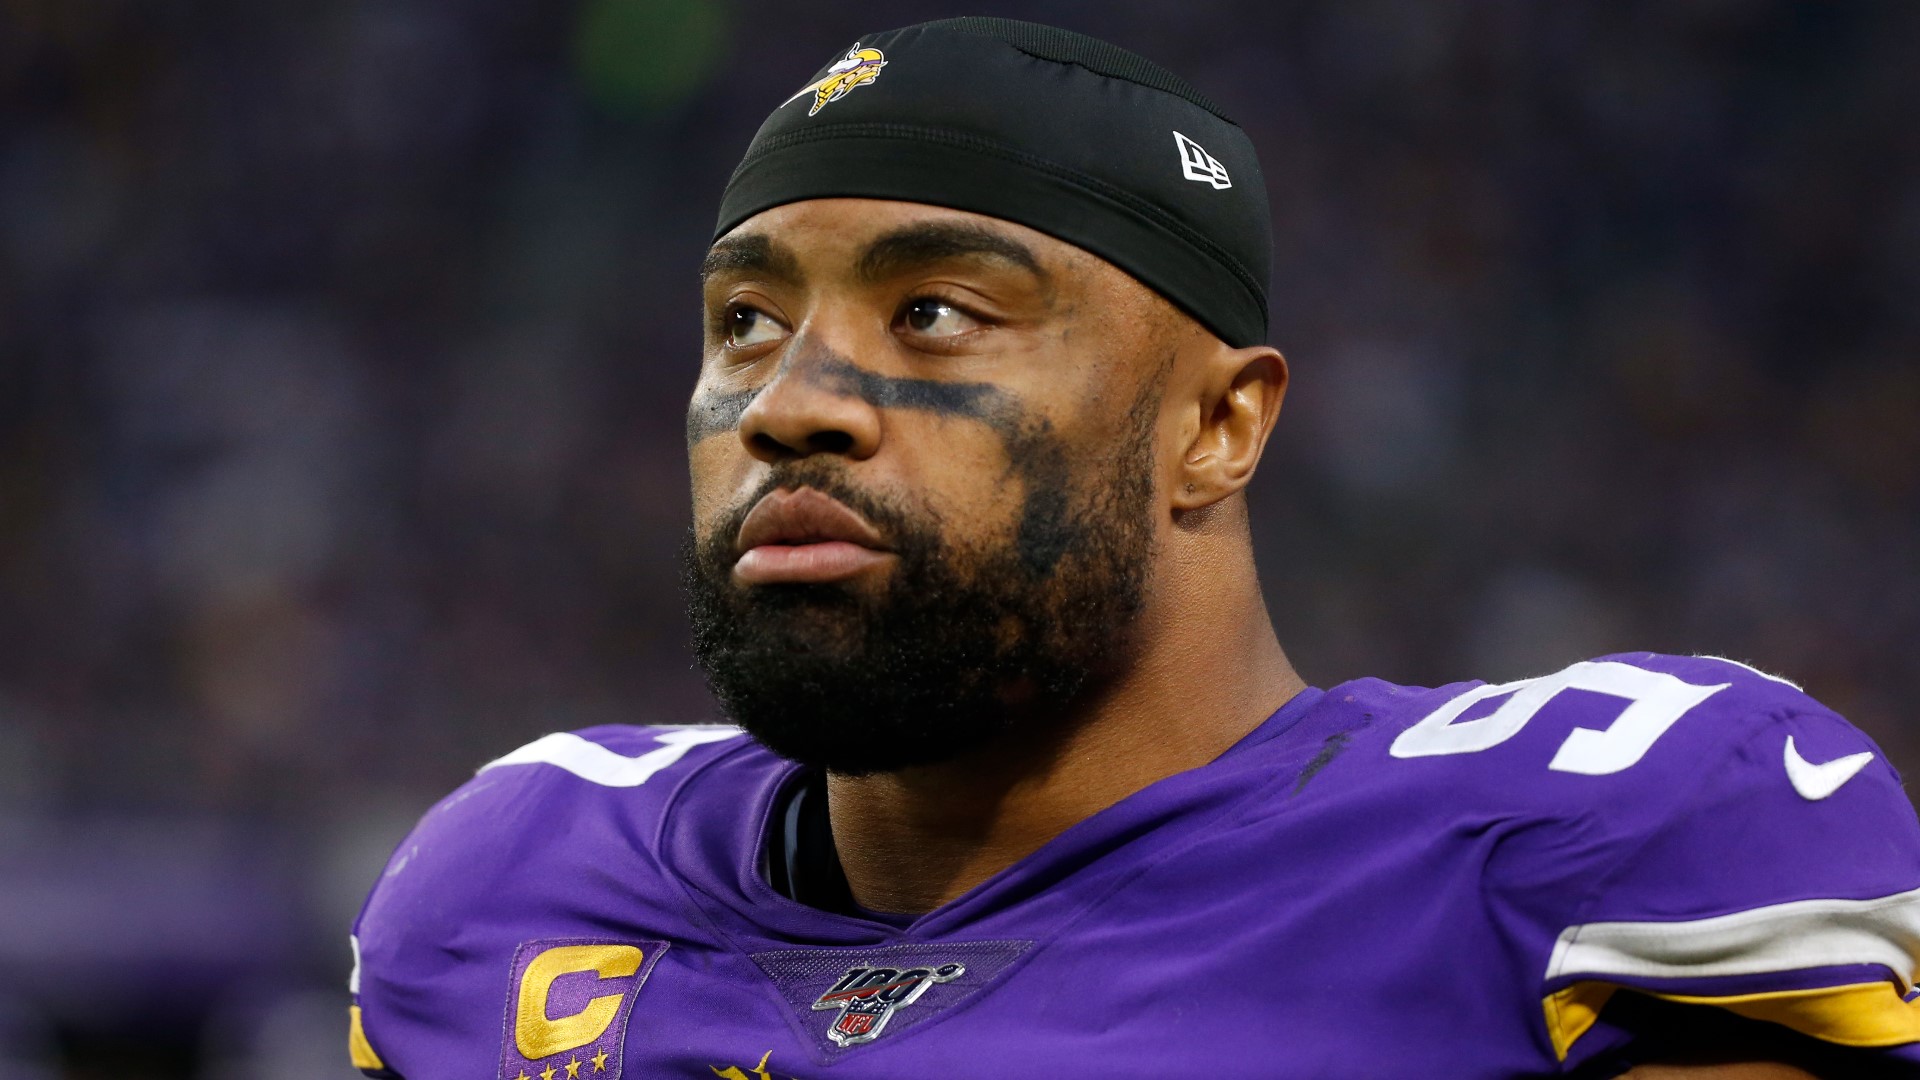 It's natural to try and understand what happened inside the Minnetrista home of Everson Griffen on Wednesday morning, but true understanding requires a longer view.